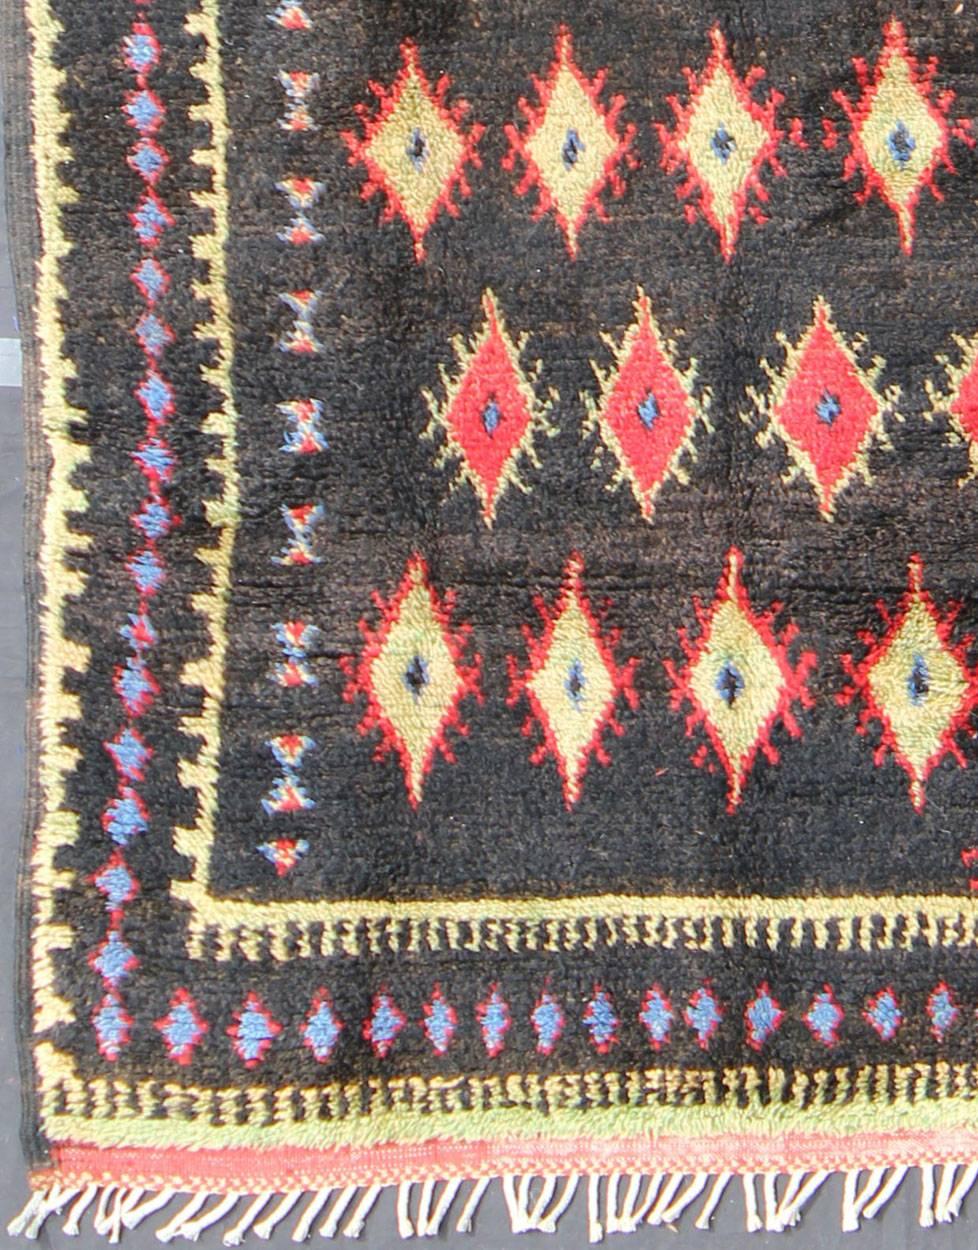 Measures: 4'9'' x 9'10''.
Featuring a central charcoal field full of red and yellow diamond-shaped motifs, this unique Moroccan rug displays a harmonious and rich color palette of charcoal, red, cream, yellow and blue. Its border is composed of